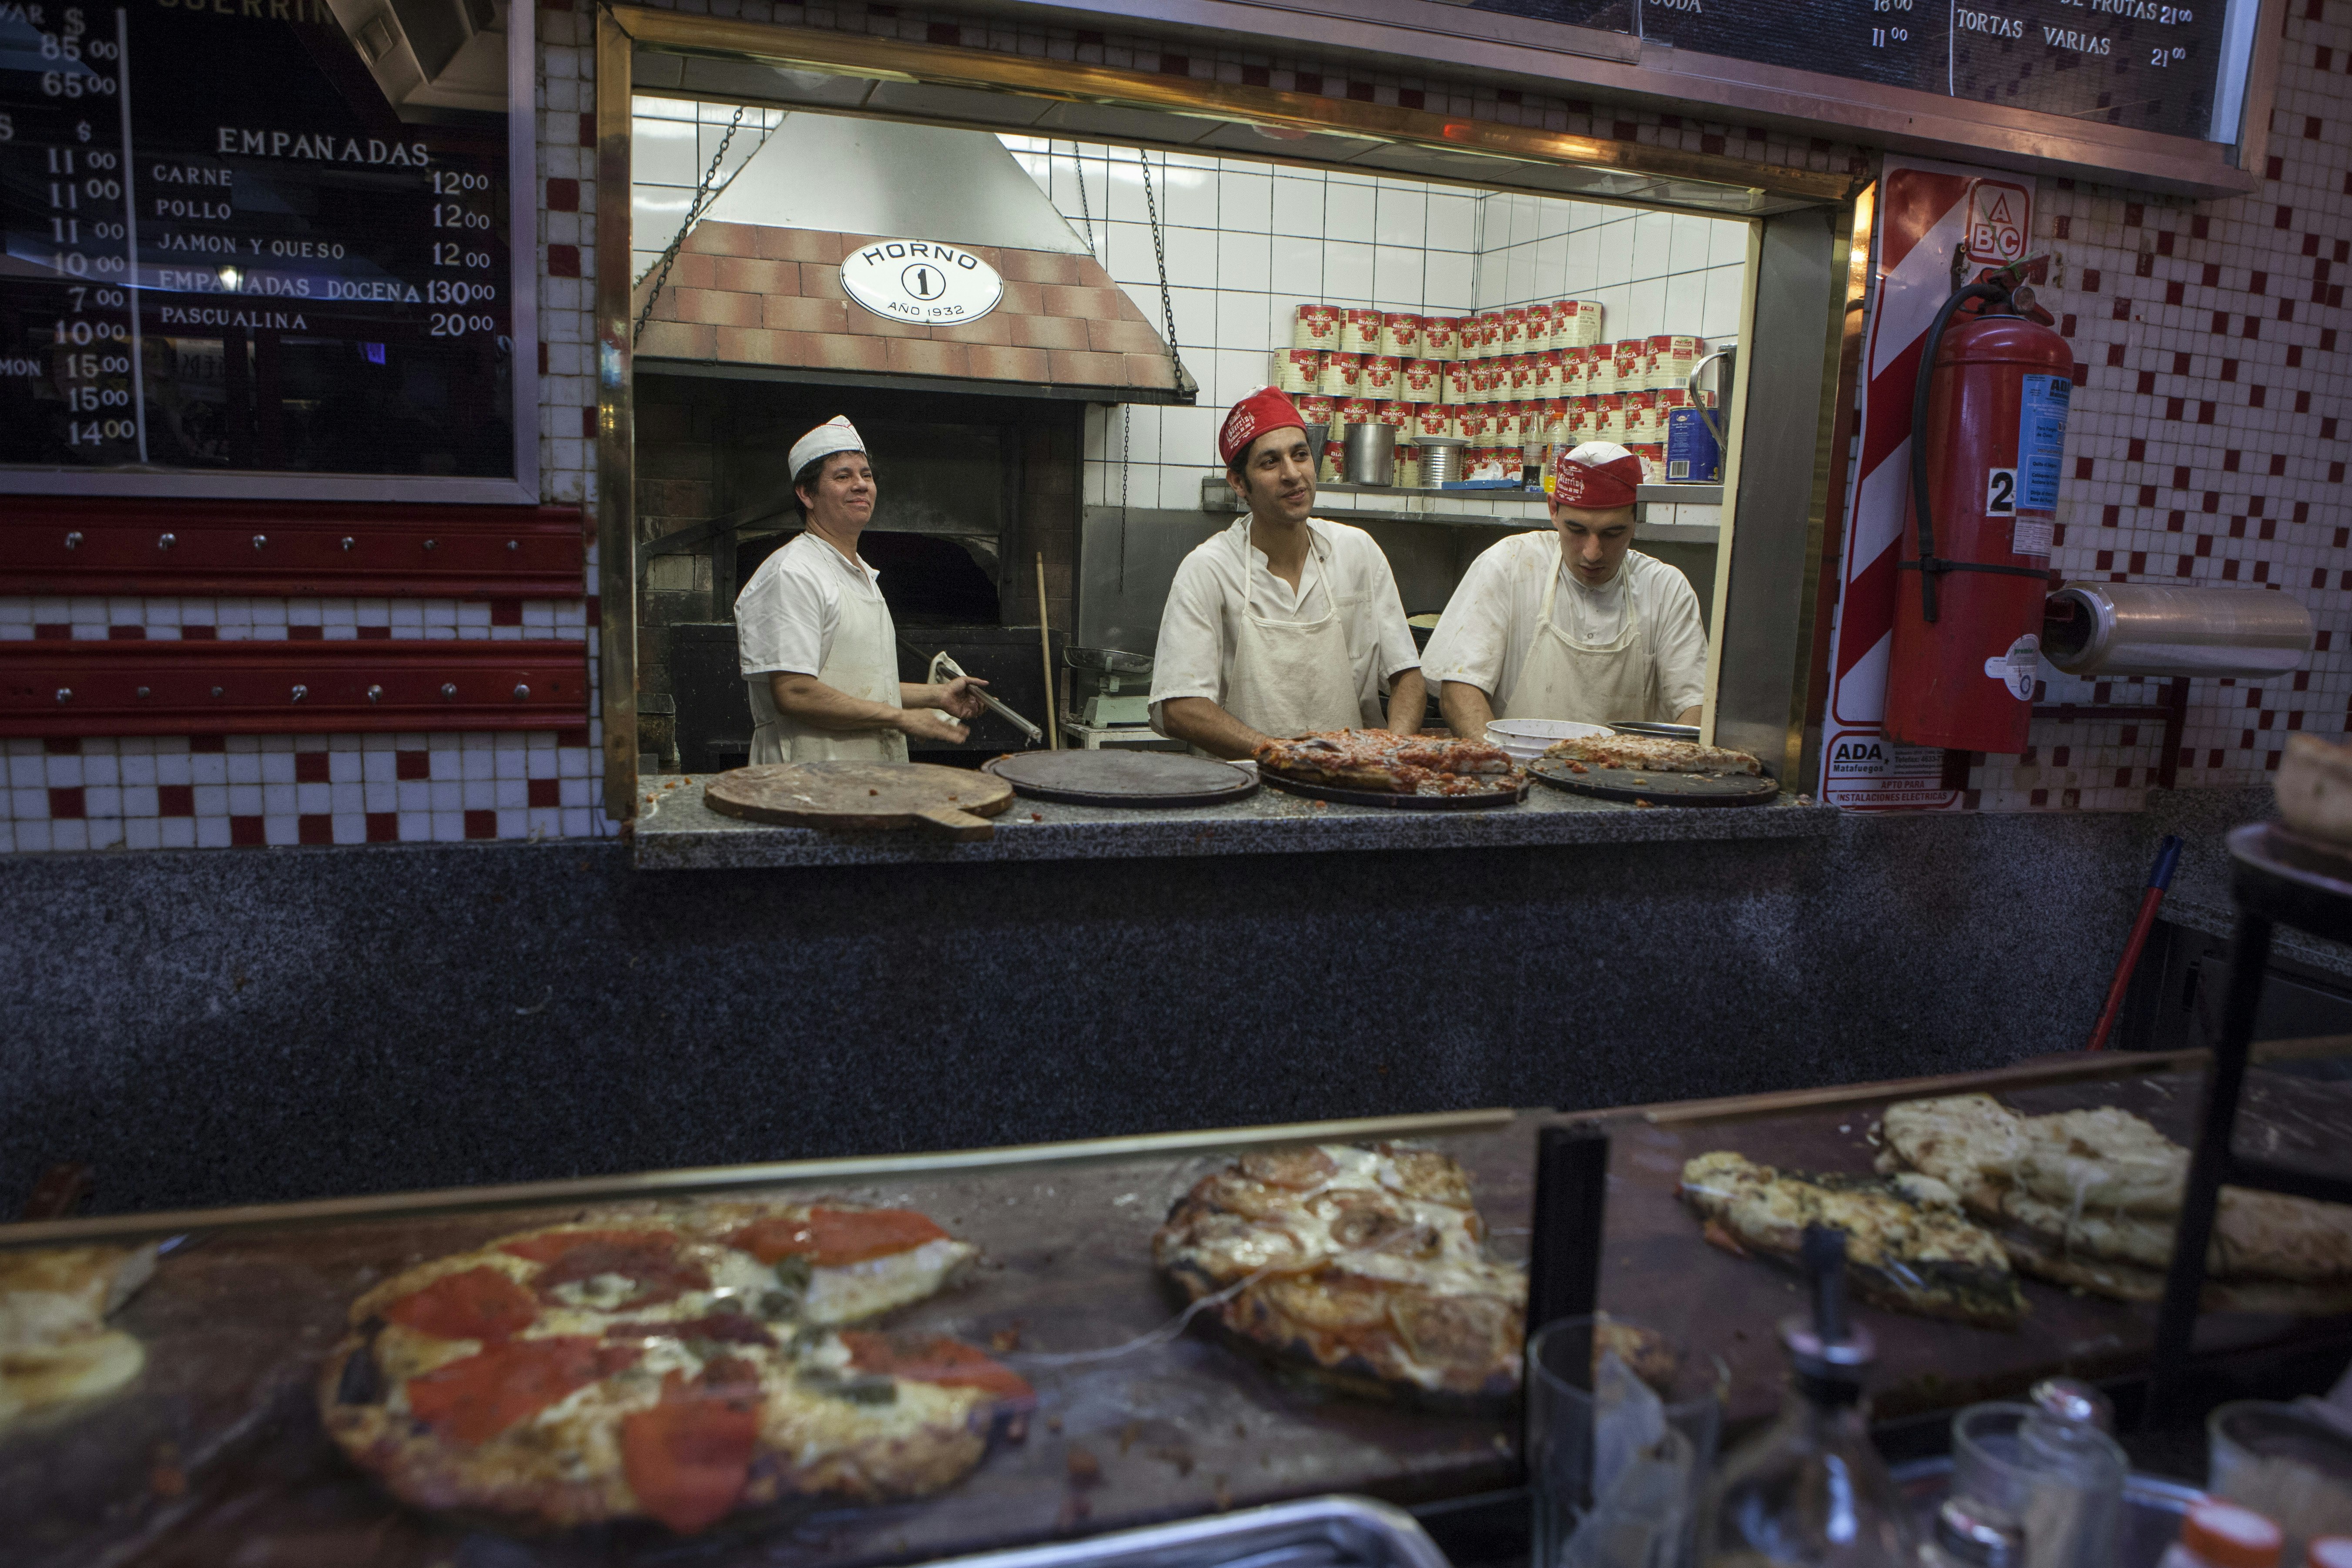 Three pizza chefs and a pizza oven can be seen through a hatch in the wall at Pizzería Güerrín. There are several pizzas laid out on a counter in the foreground.